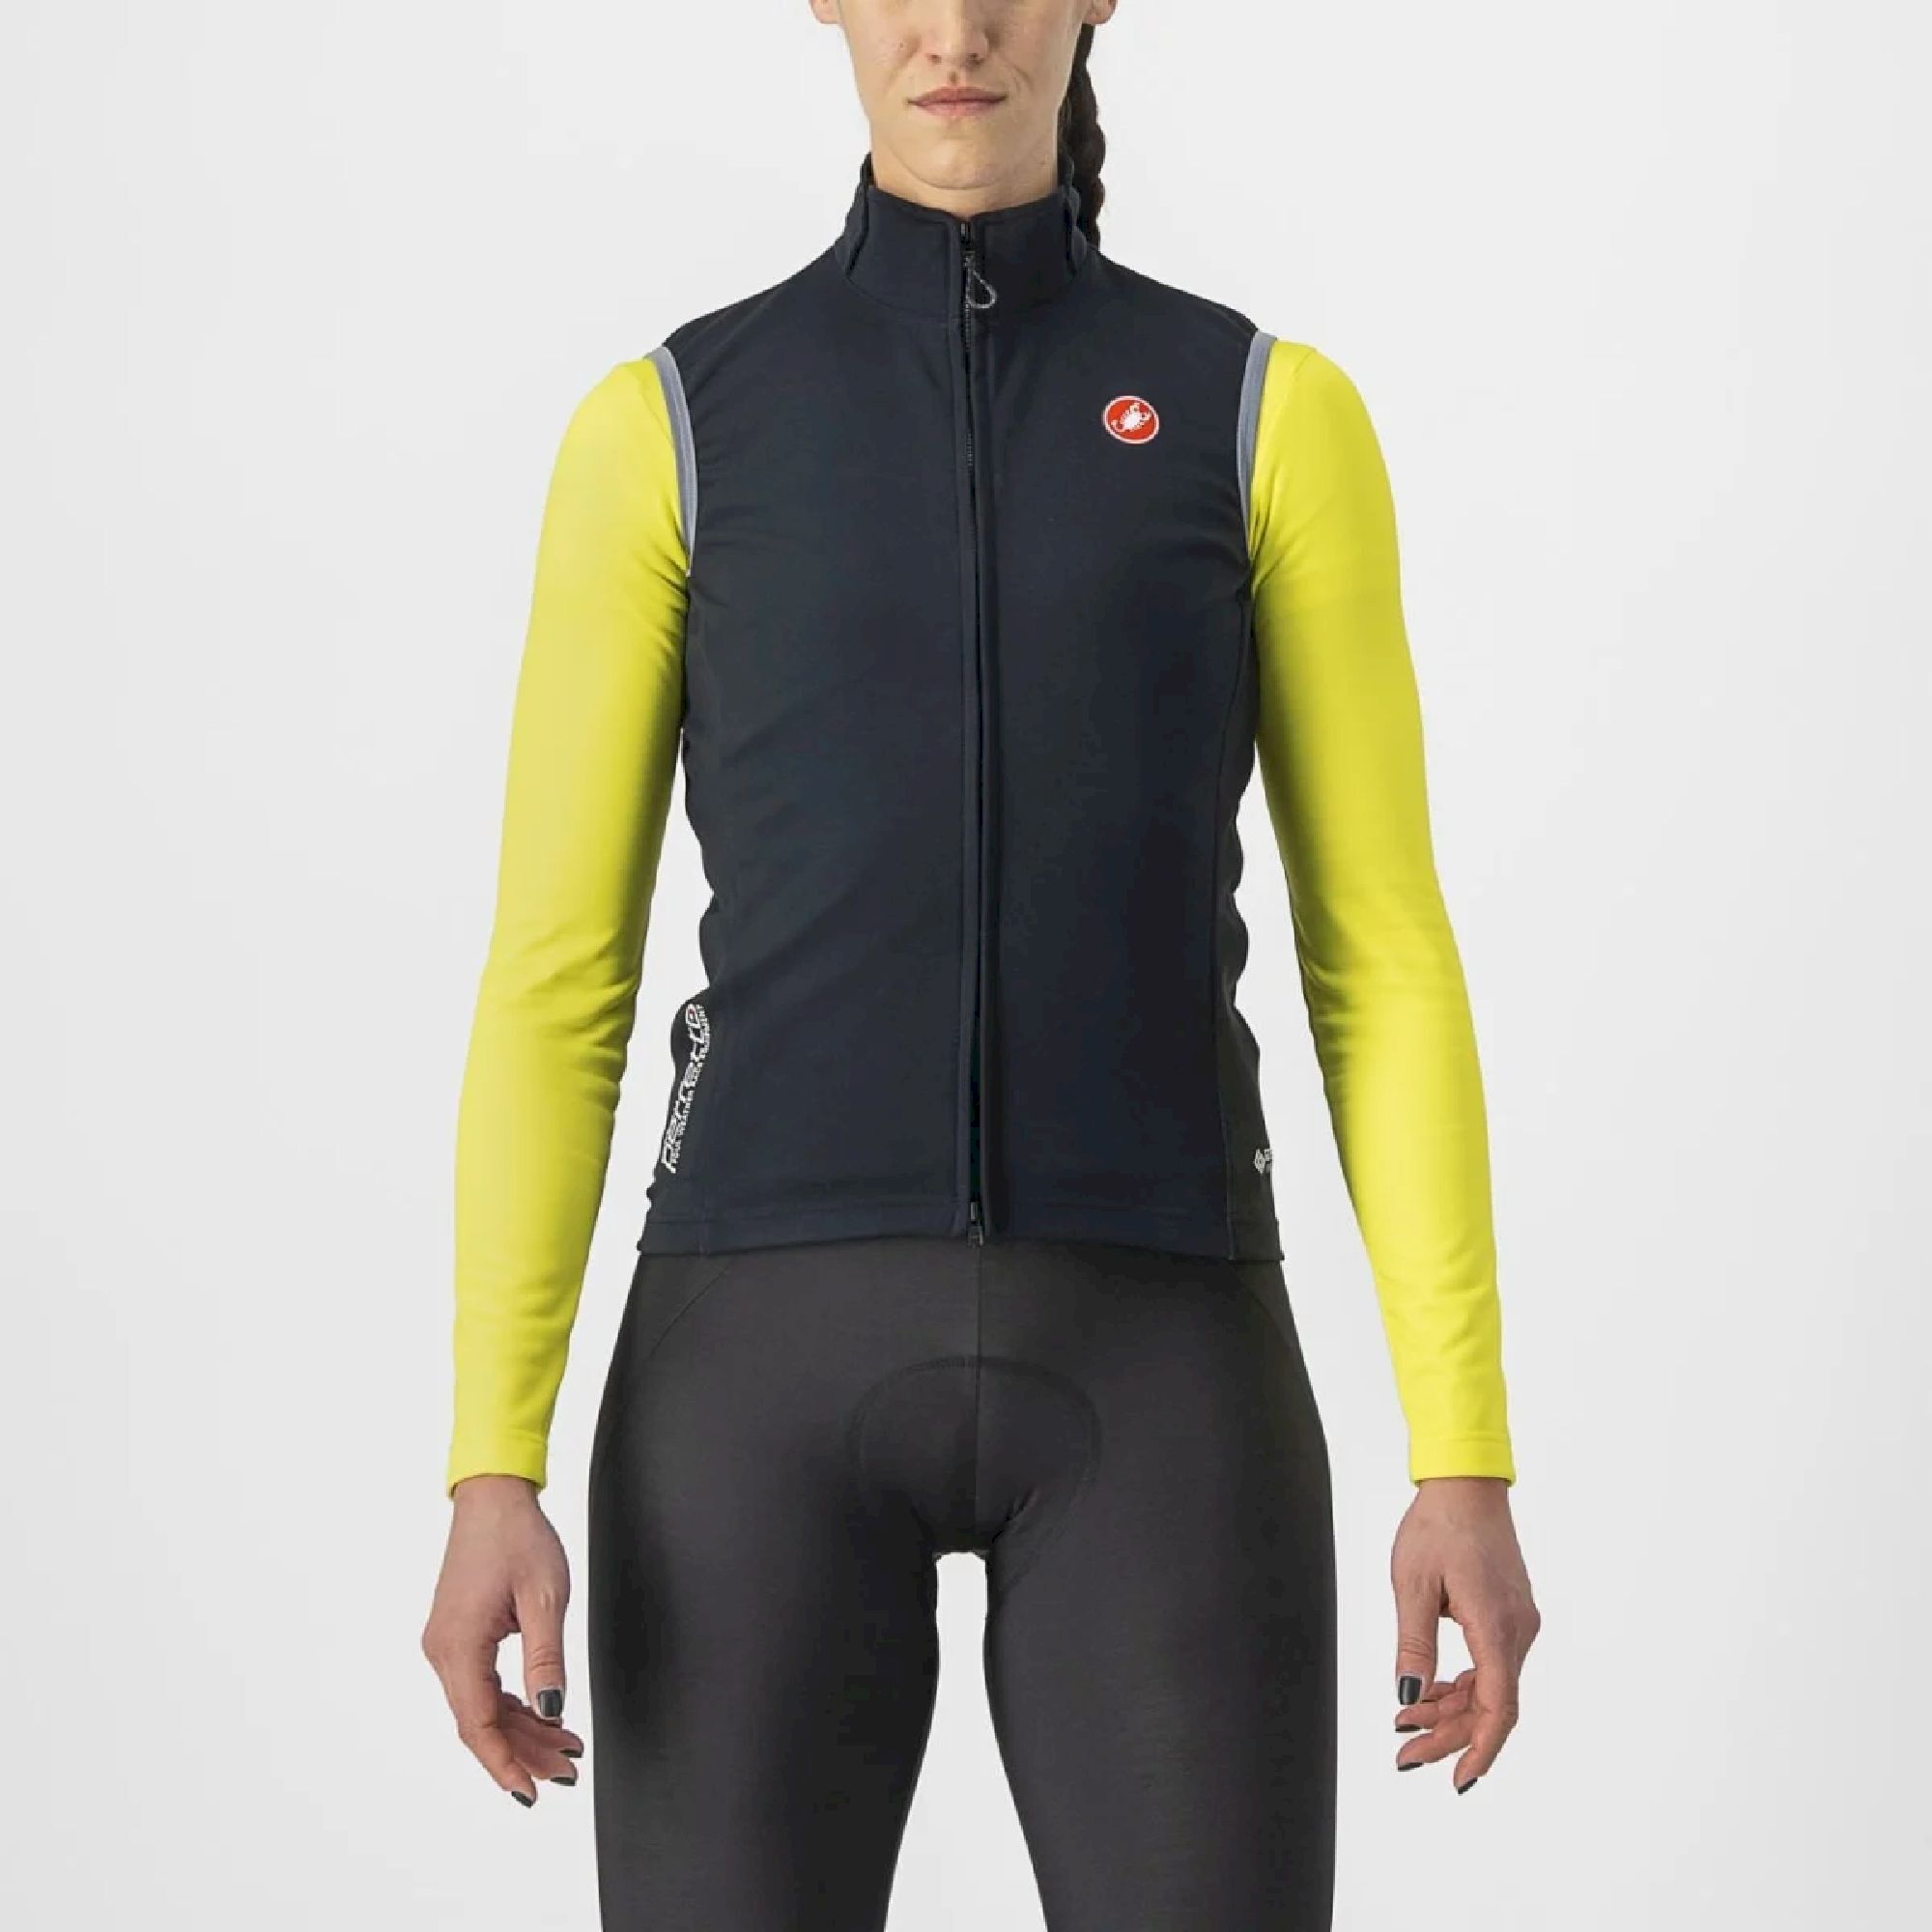 Castelli Perfetto RoS 2 W Vest - Chaleco ciclismo - Mujer | Hardloop